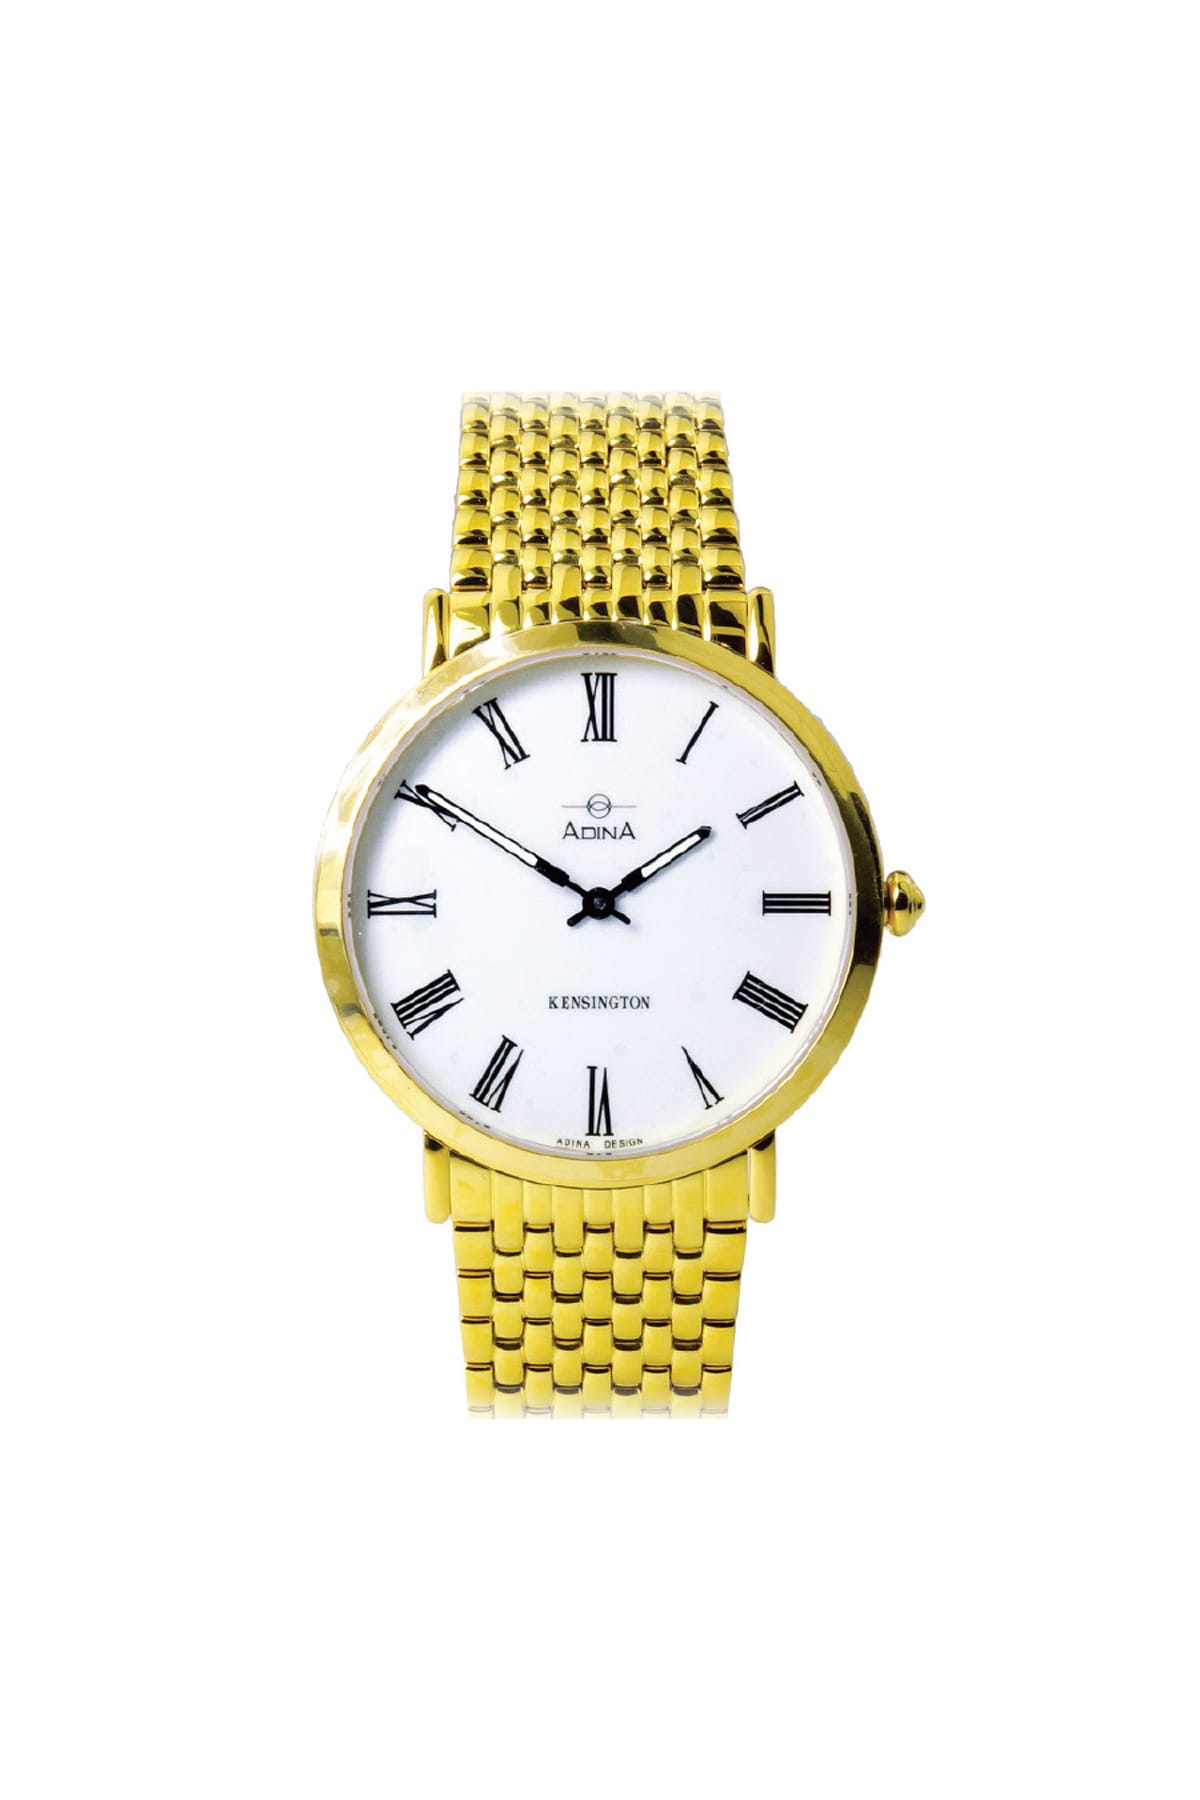 Adina Kensington Dress Watch CT104 G1RB available from LeGassick.